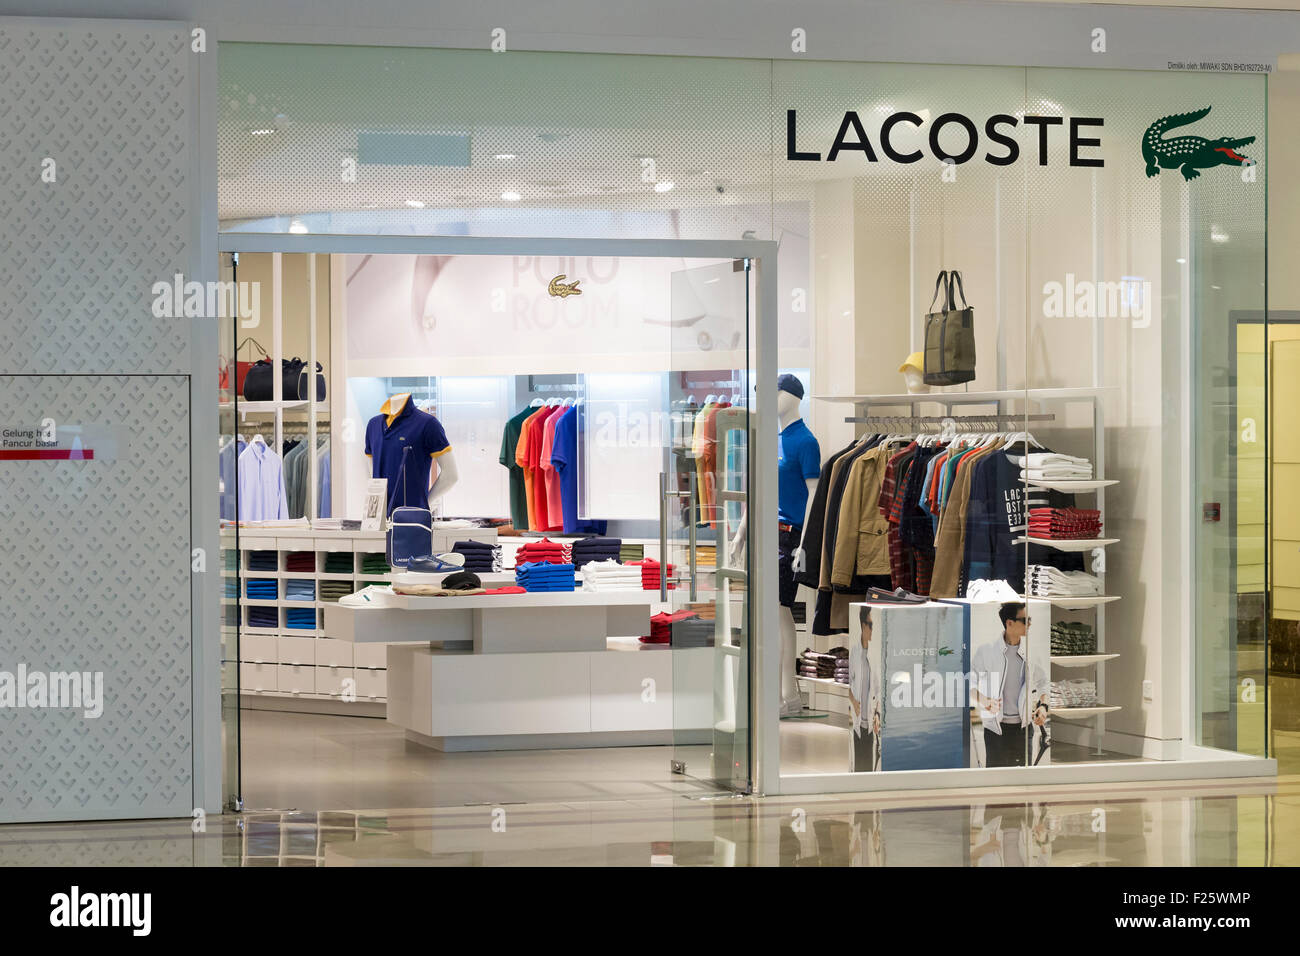 nearest lacoste outlet store